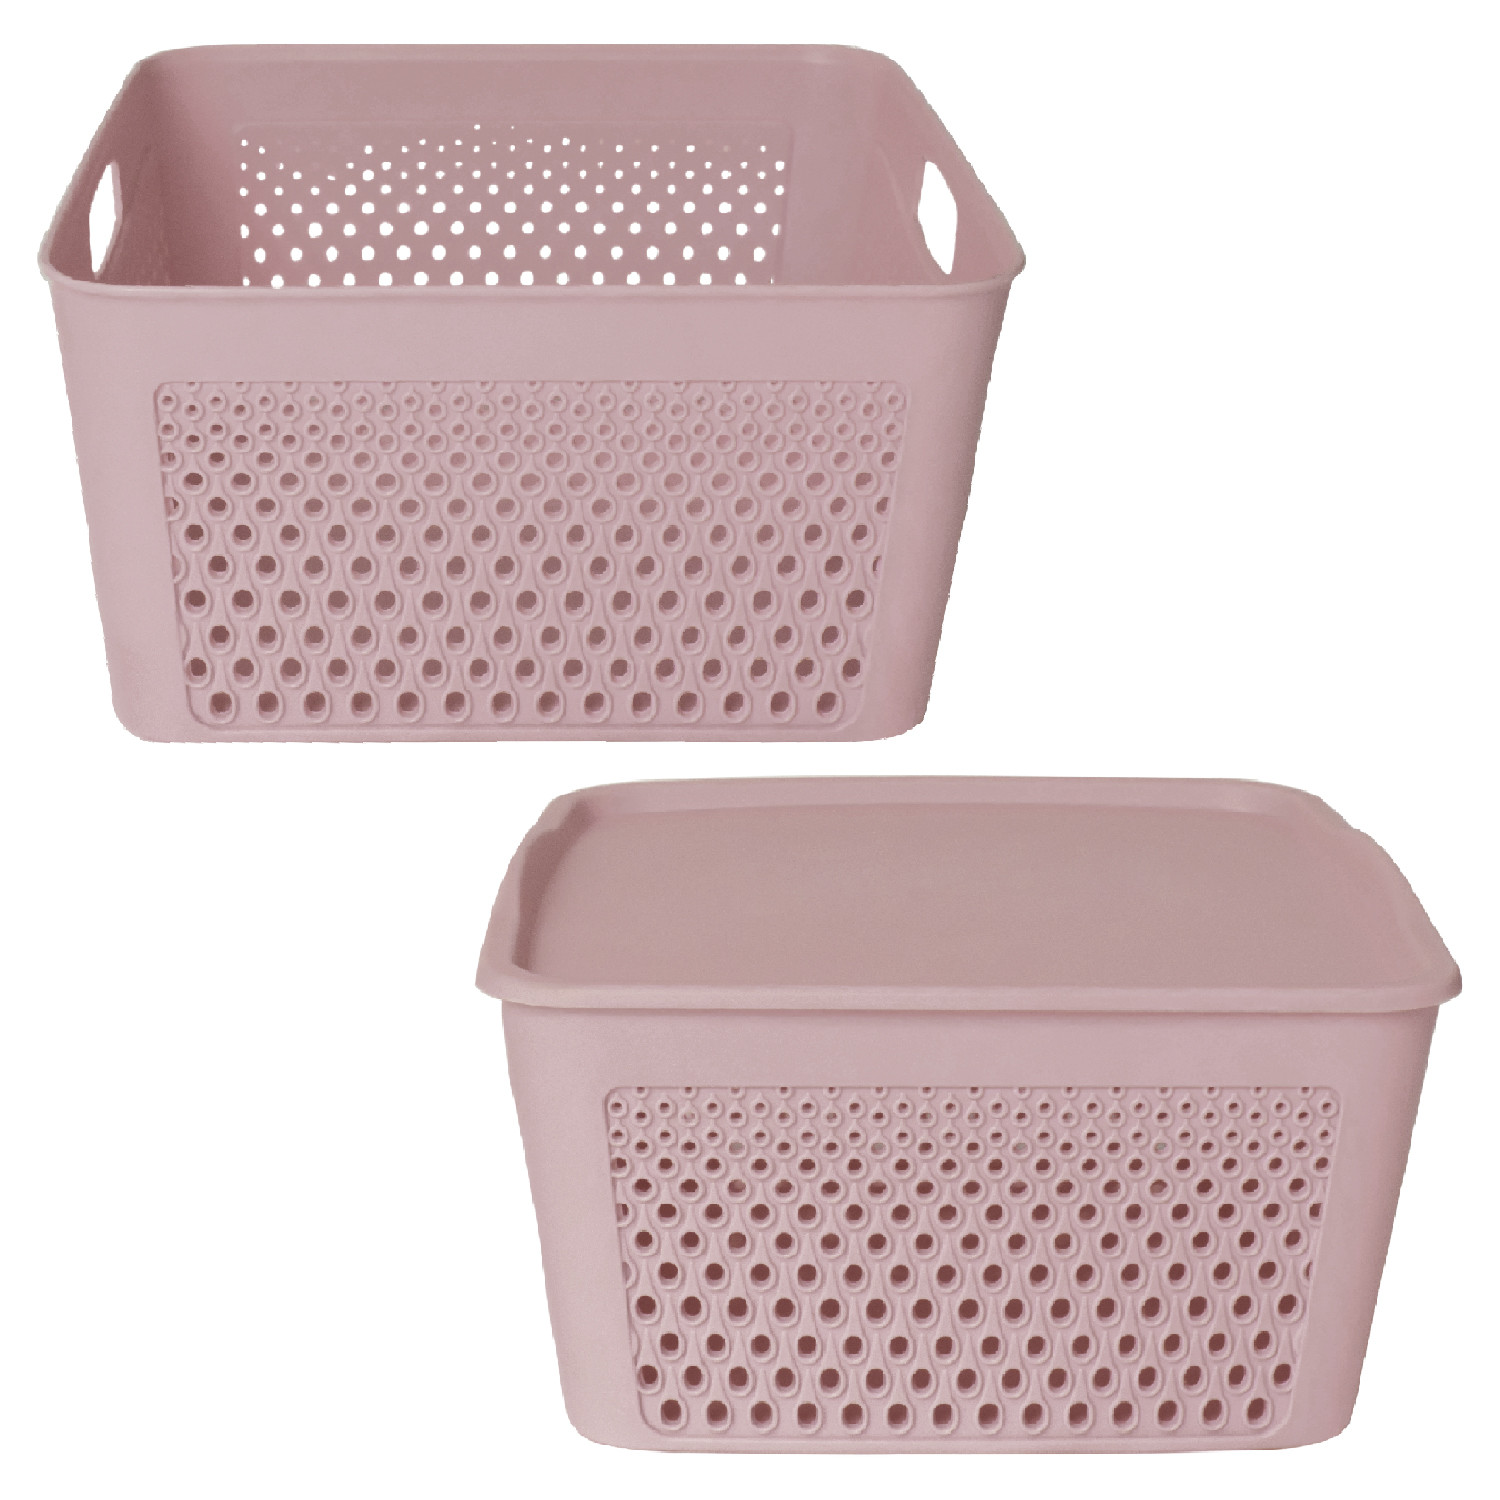 Kuber Industries Netted Design Unbreakable Multipurpose Square Shape Plastic Storage Baskets with lid Small Pack of 3 (Brown, Beige, Grey)